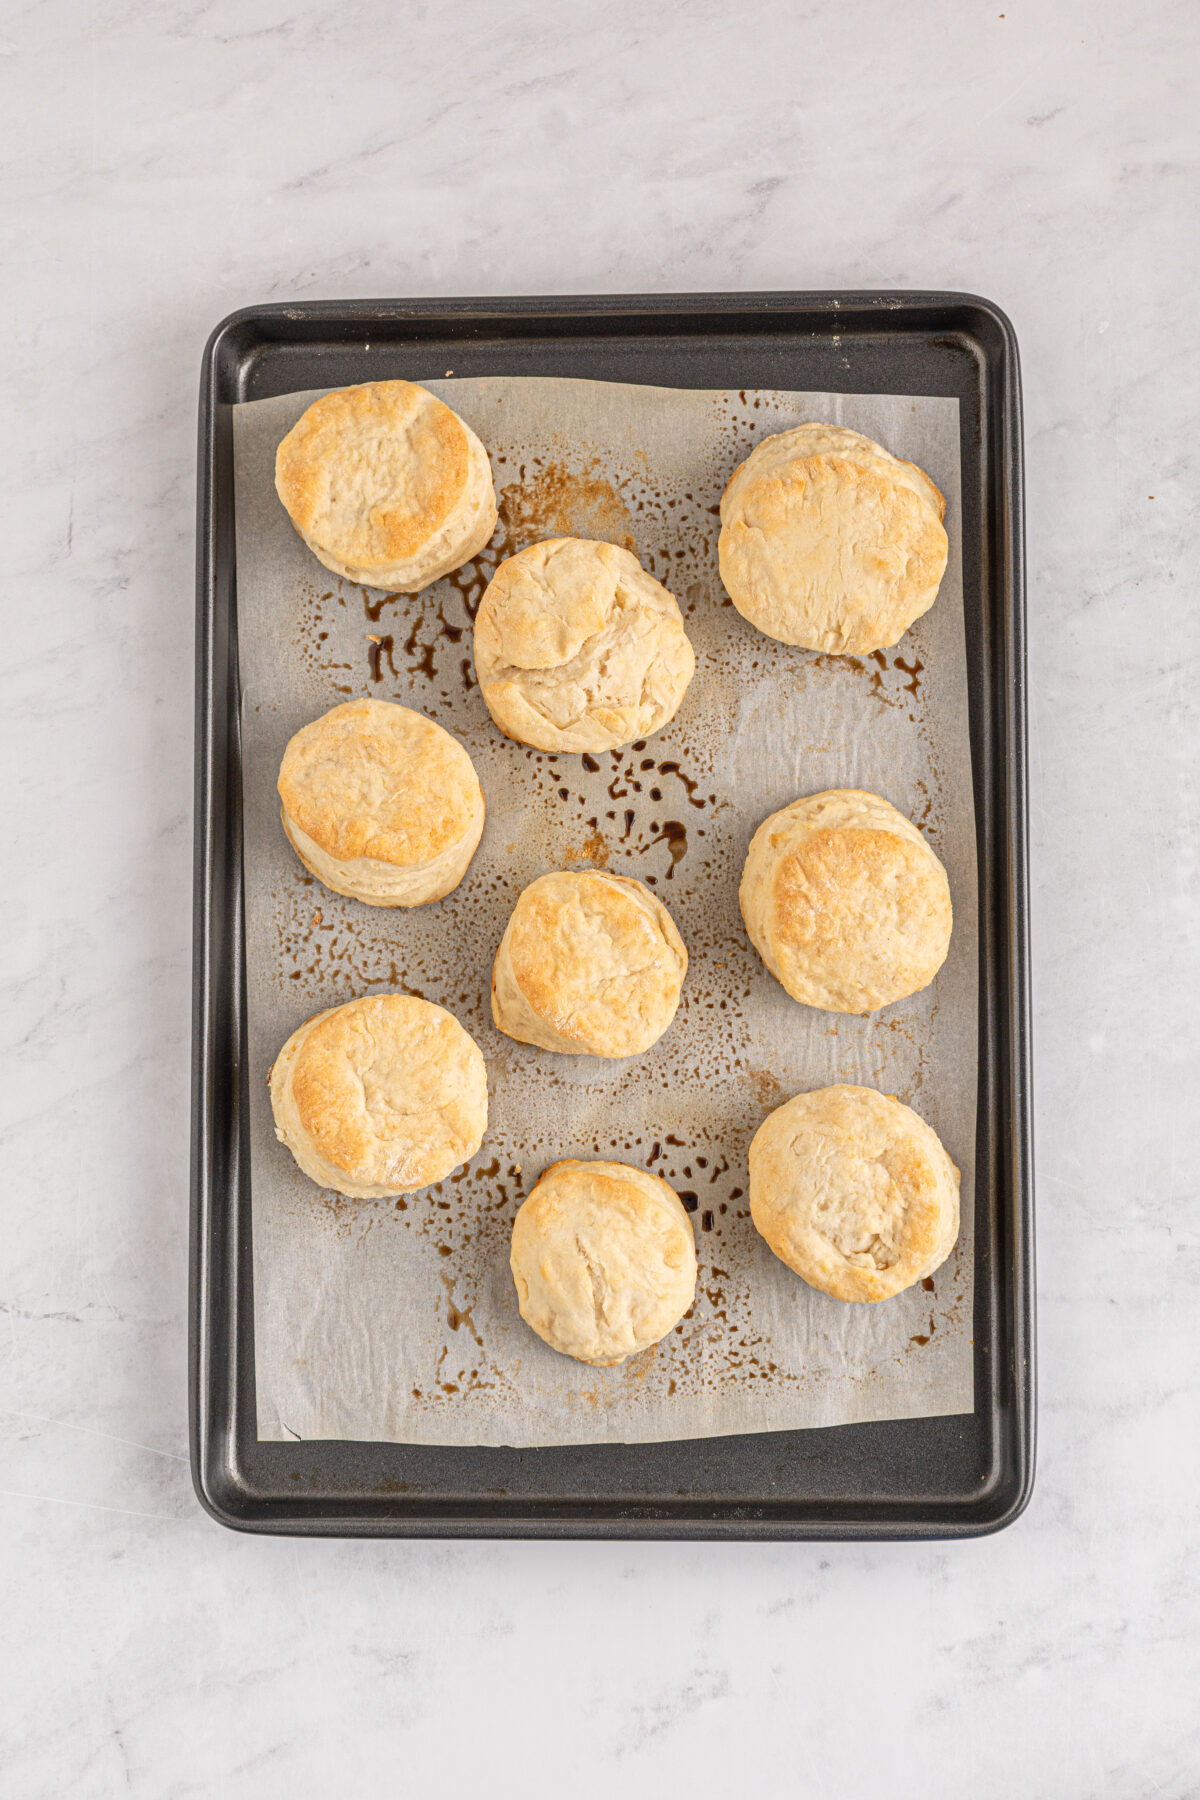 Baked, biscuits on the baking sheet.